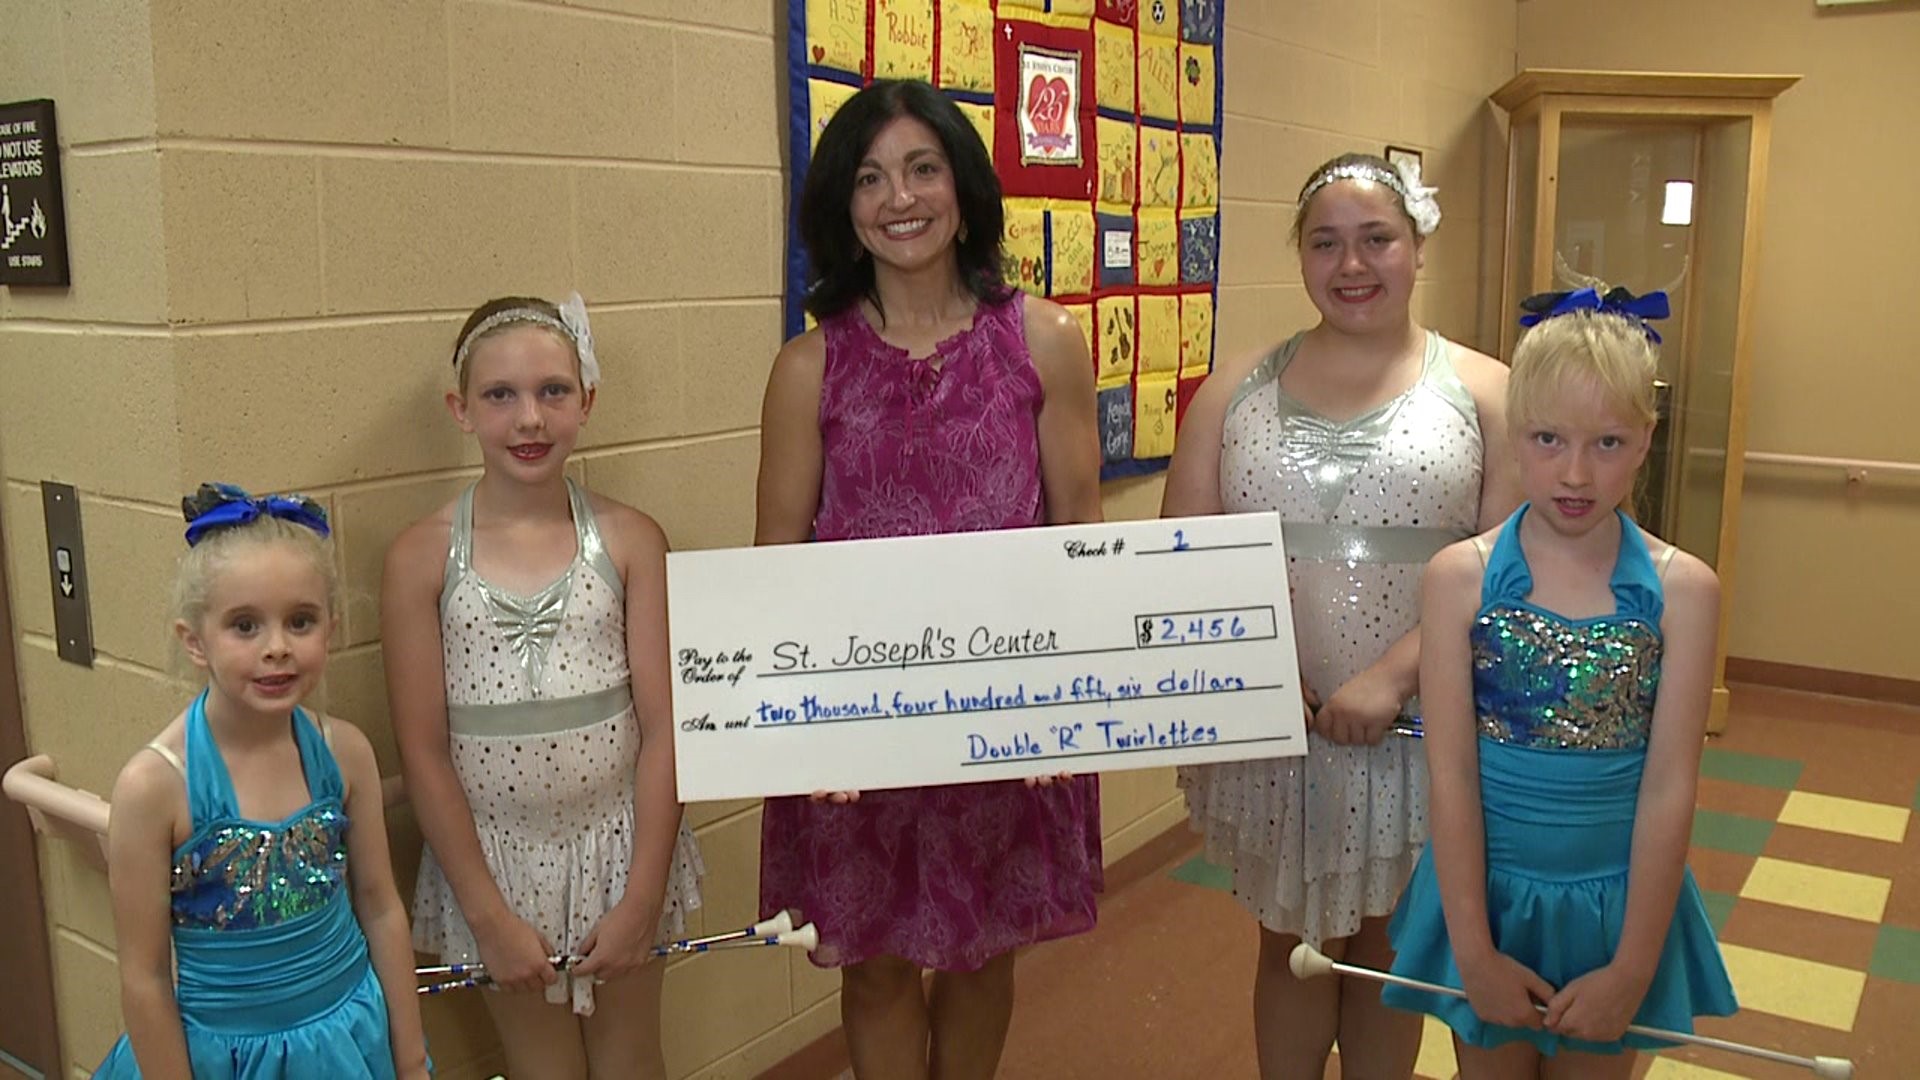 Check Presentation: Double R Twirlettes (Snoozelen Room)